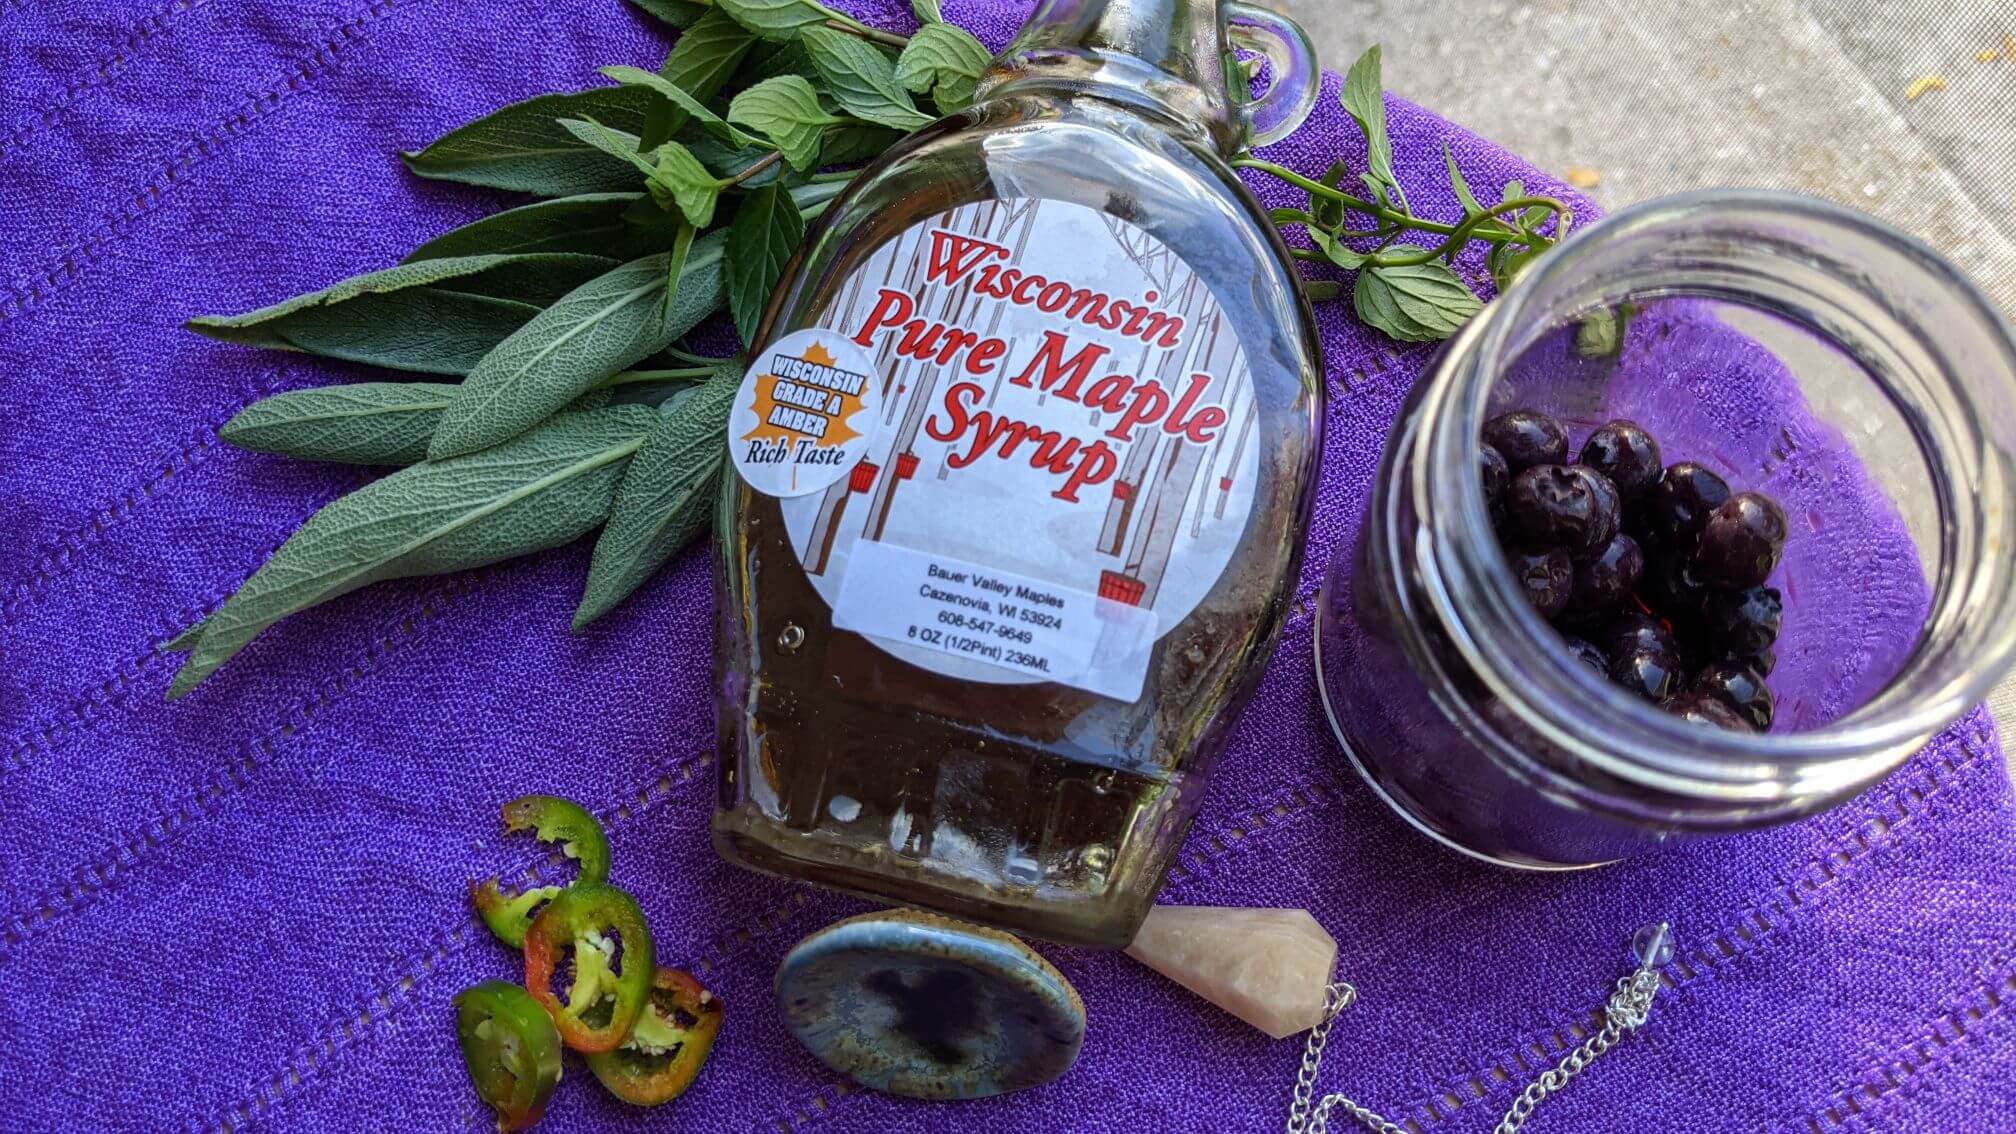 A small jar of thawed, frozen blueberries sits on a purple tablecloth with a jar of Wisconsin maple syrup, a few slices of fresh jalapeno pepper, and a moonstone pendant.